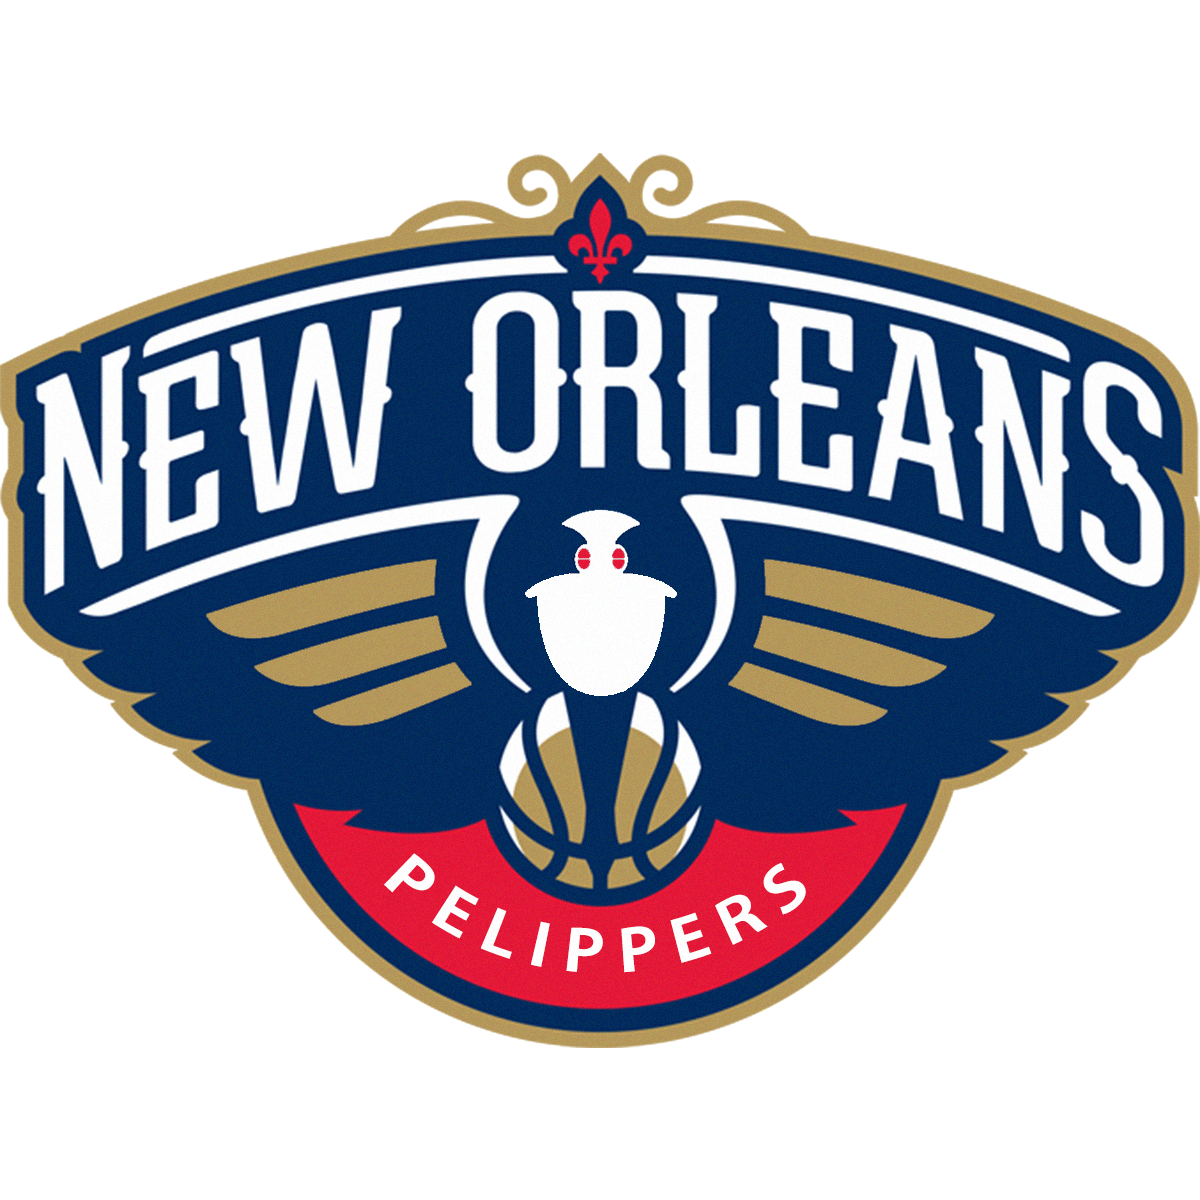 New Orleans Pelippers.png